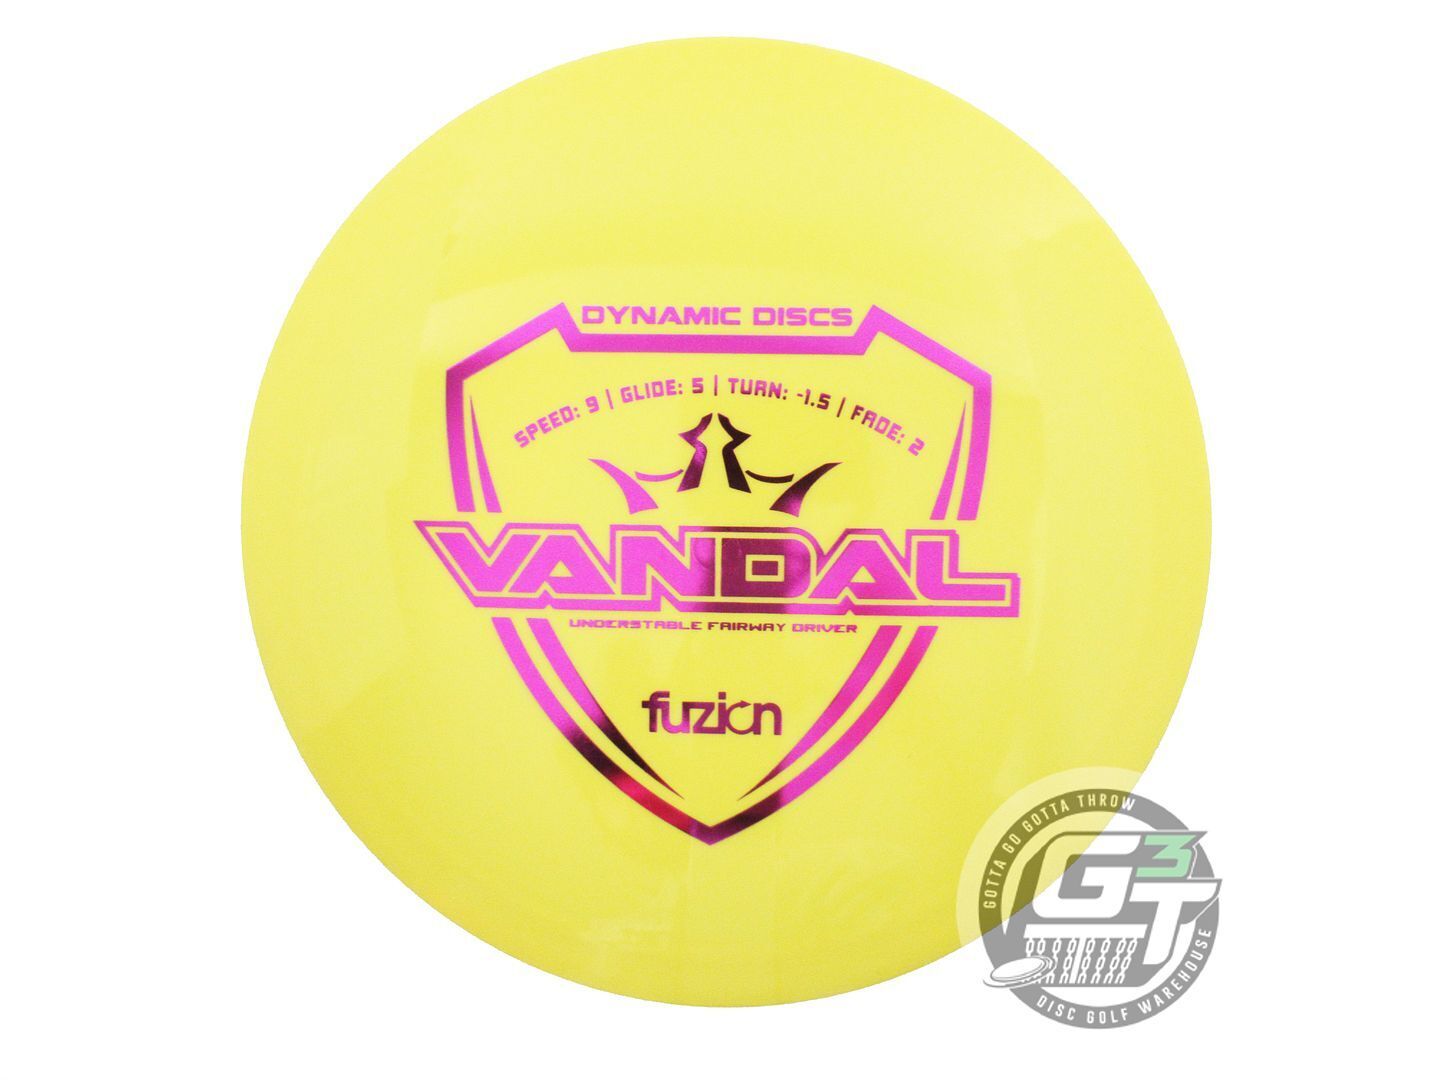 Dynamic Discs Fuzion Vandal Fairway Driver Golf Disc (Individually Listed)